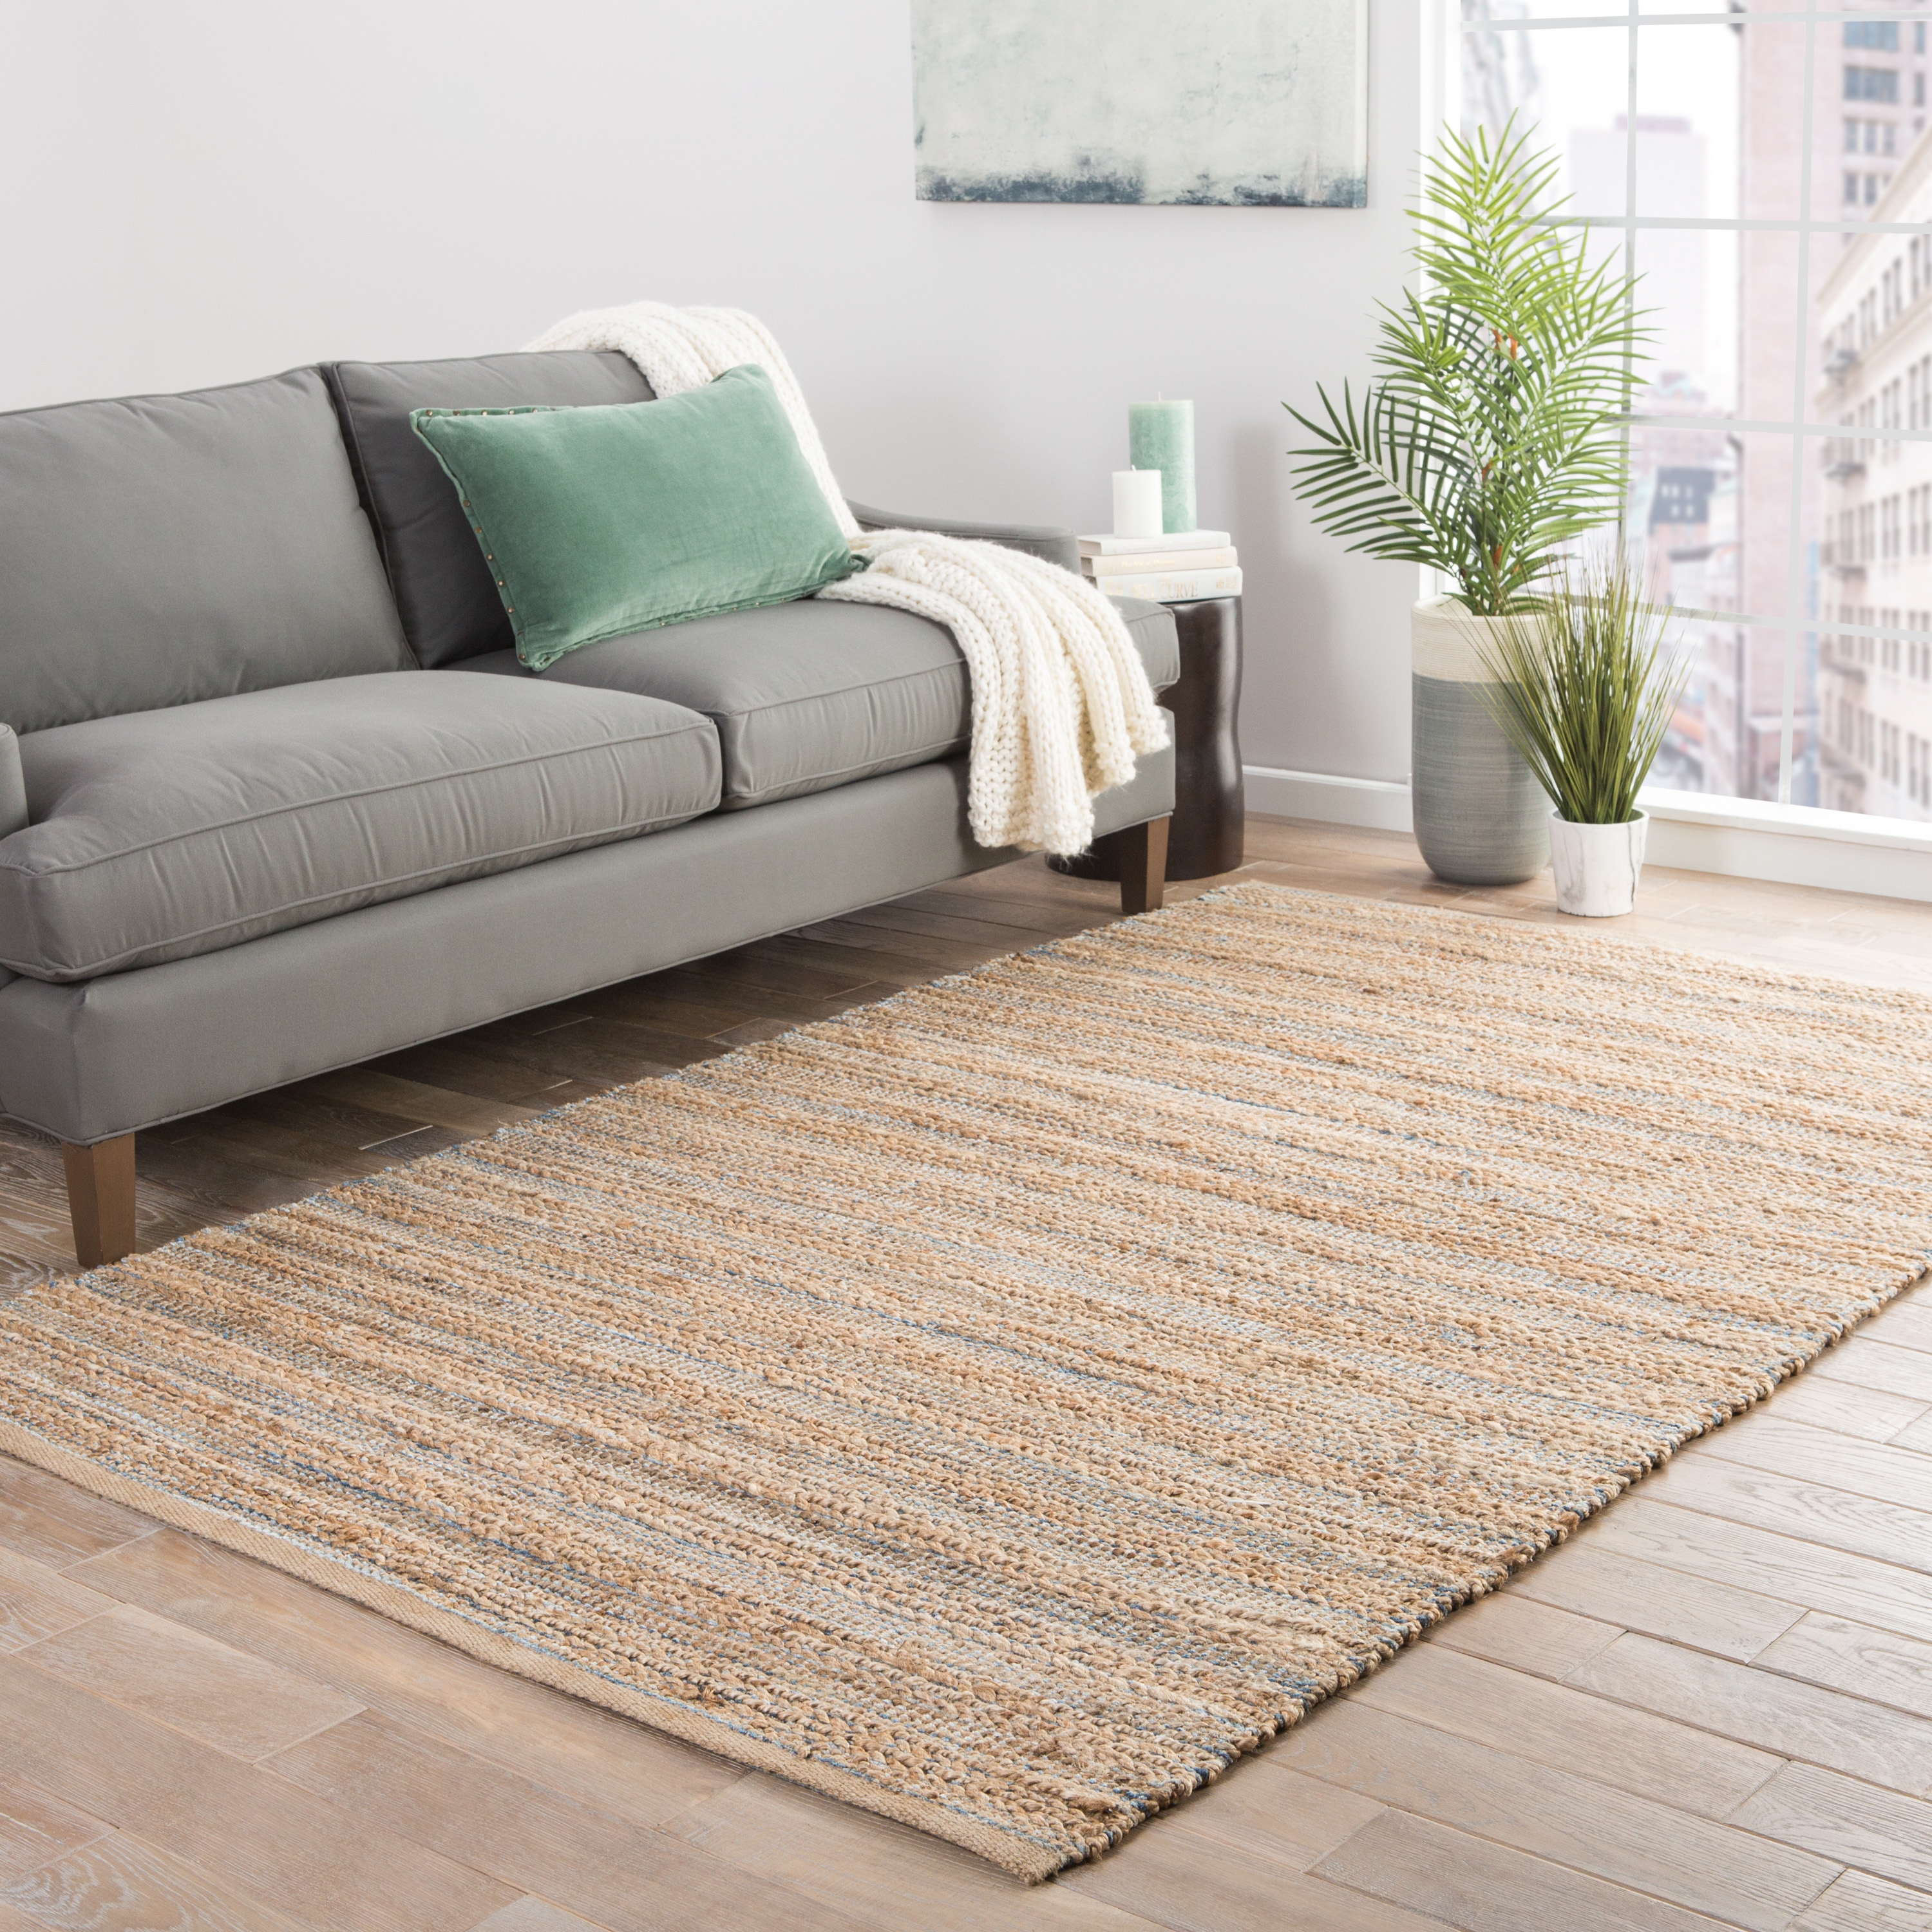 Canterbury Natural Solid Beige/ Blue Runner Rug (2'6"X9') - Image 4